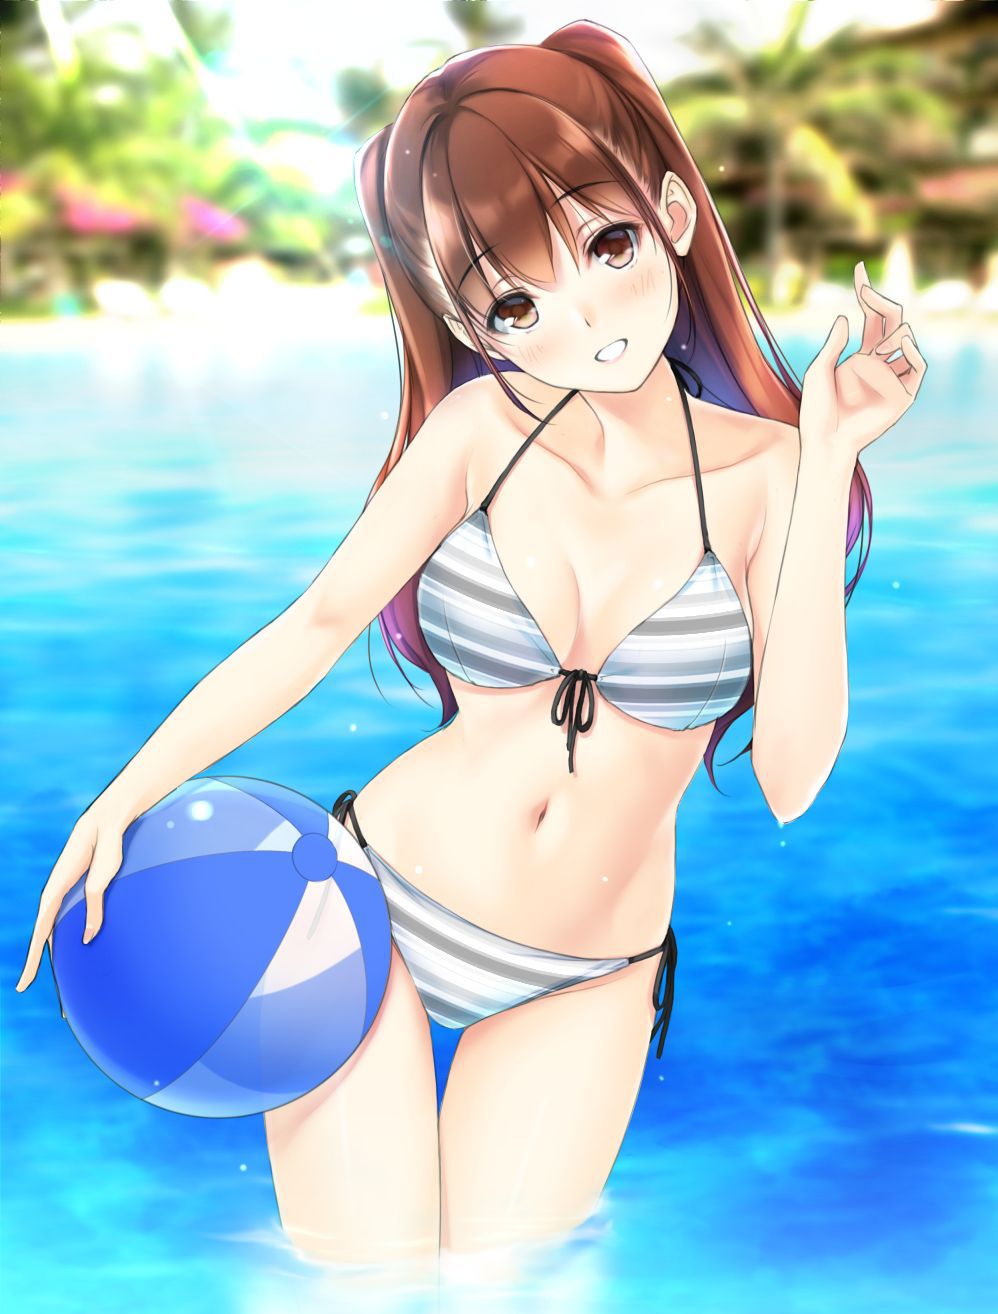 [Secondary] second image of dazzling beautiful girl in swimsuit part 3 [non-erotic swimsuit] 29